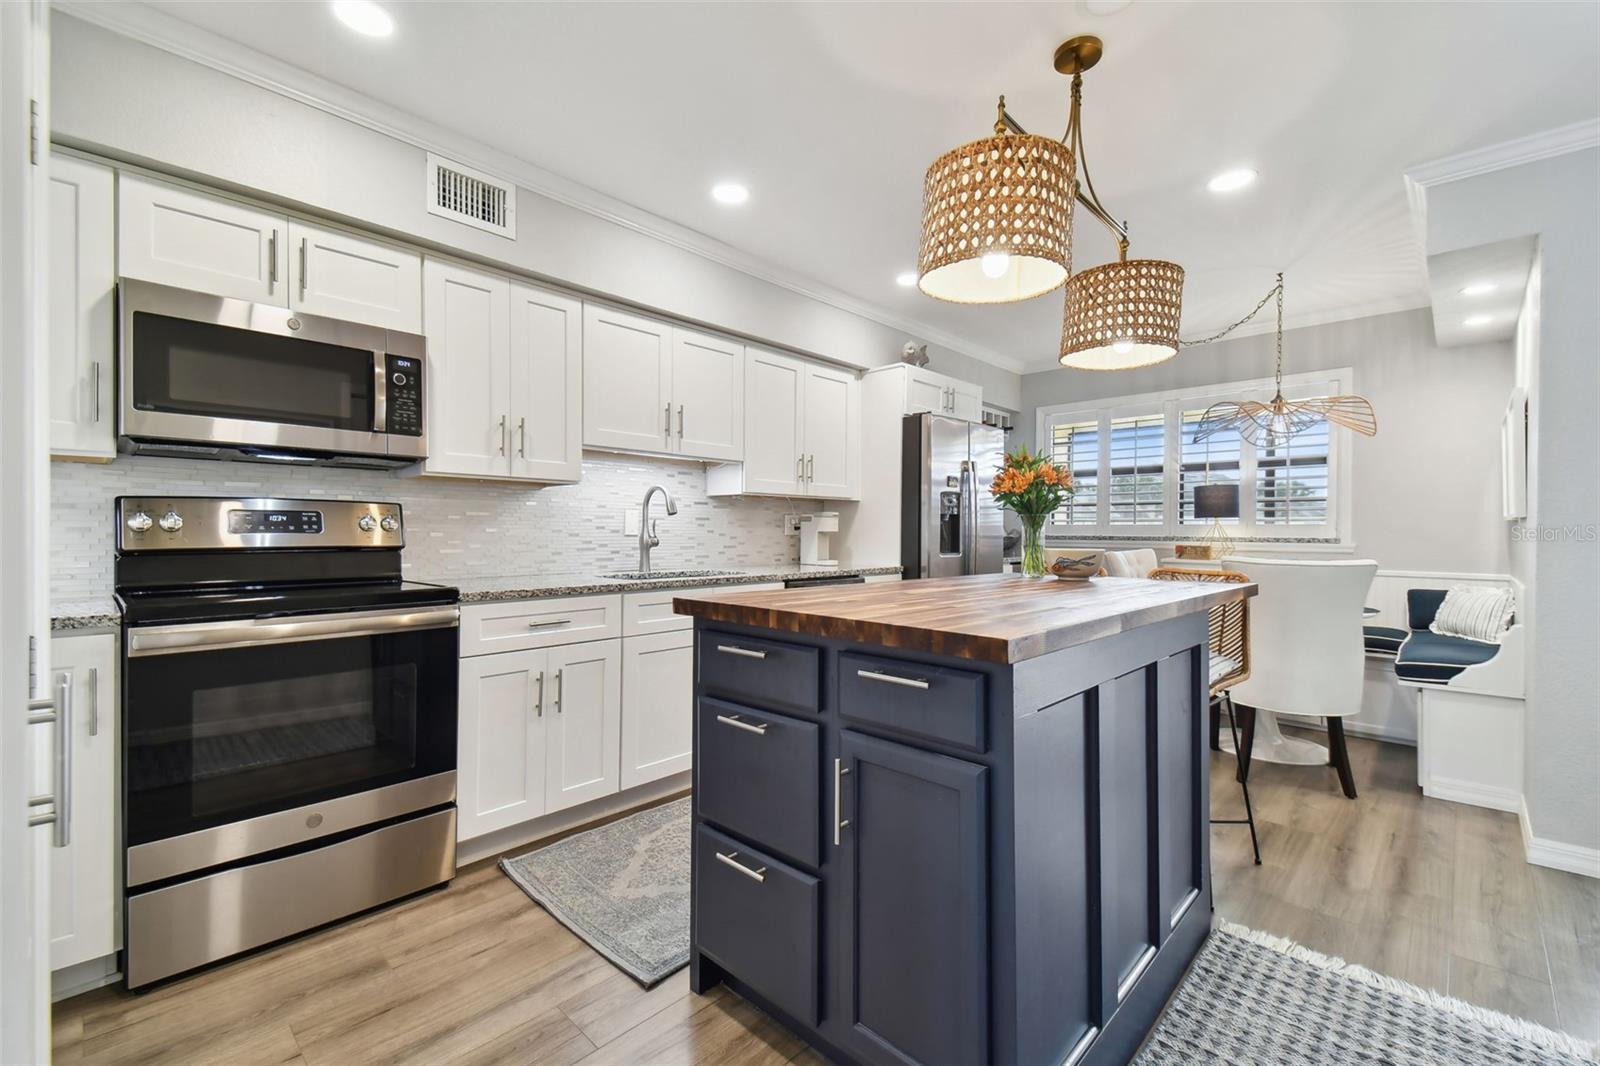 Beautifully updated kicthen with dinette and wine bar!